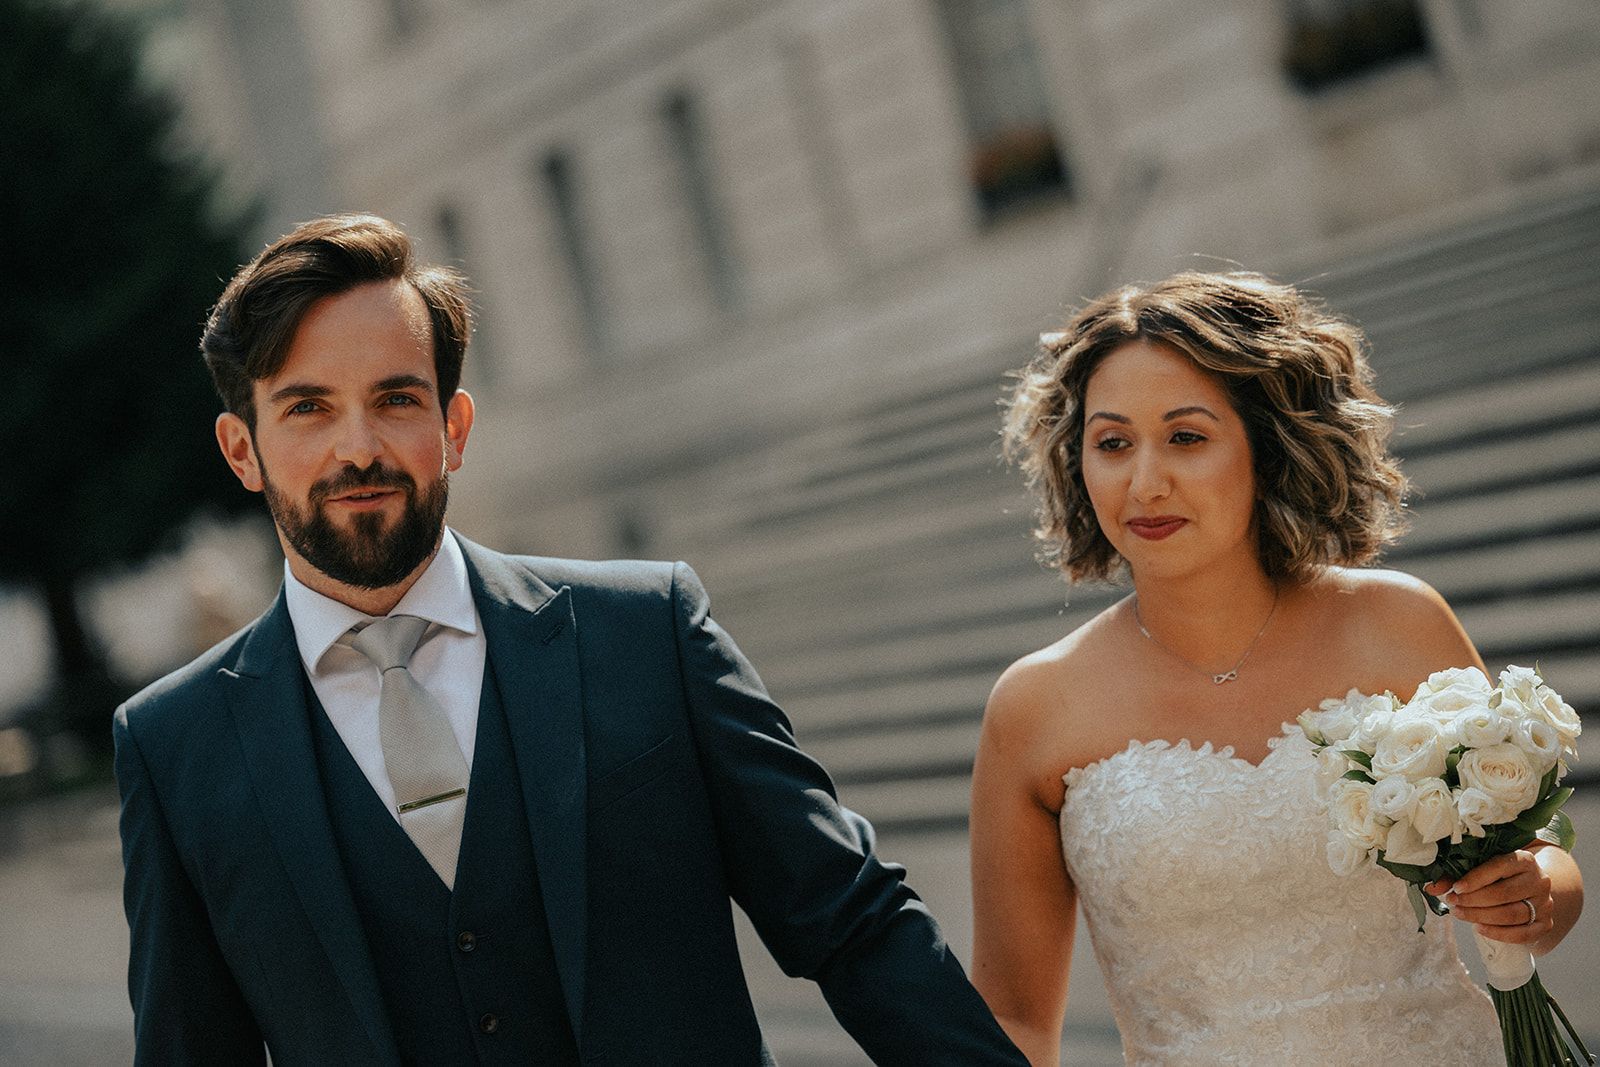 A bride and groom are walking down a set of stairs holding hands.